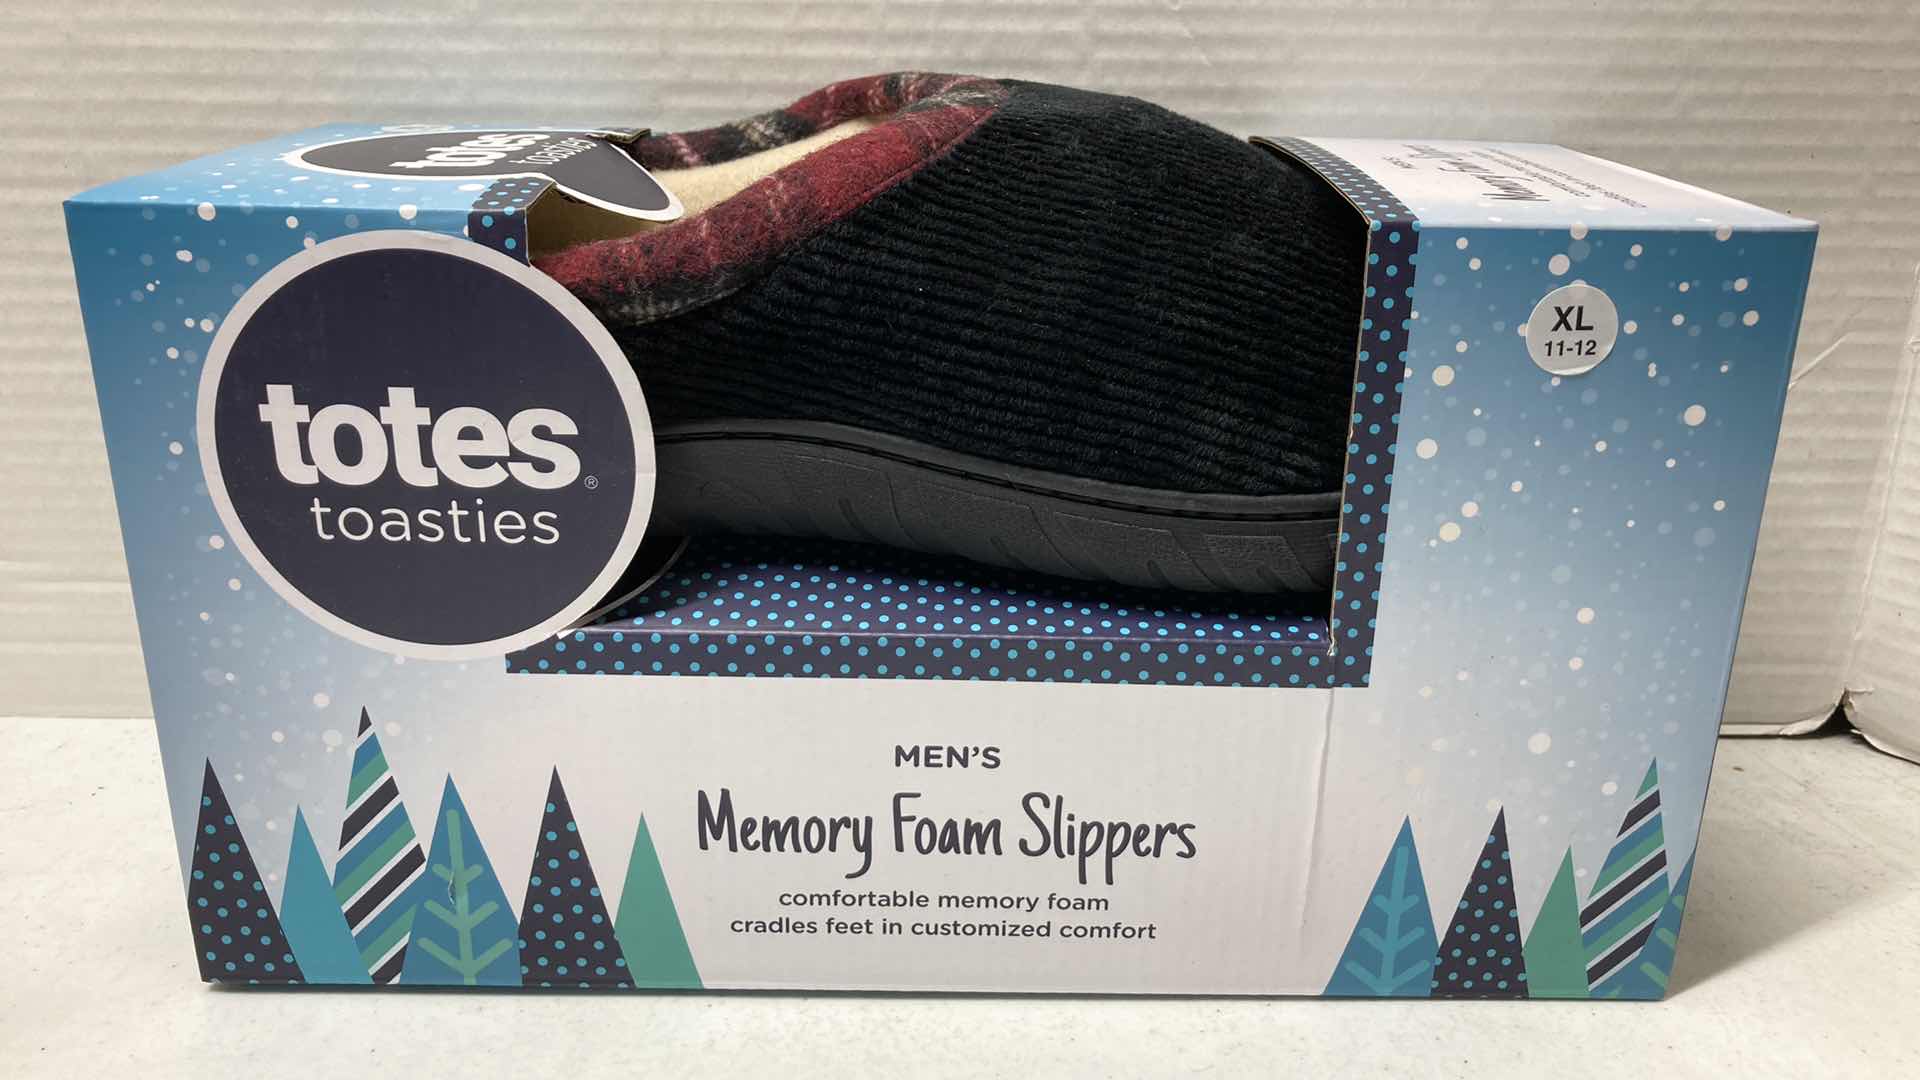 Photo 2 of NEW TOTES TOASTIES MEMORY FOAM SLIPPERS MENS SIZE XL 11-12 (2)